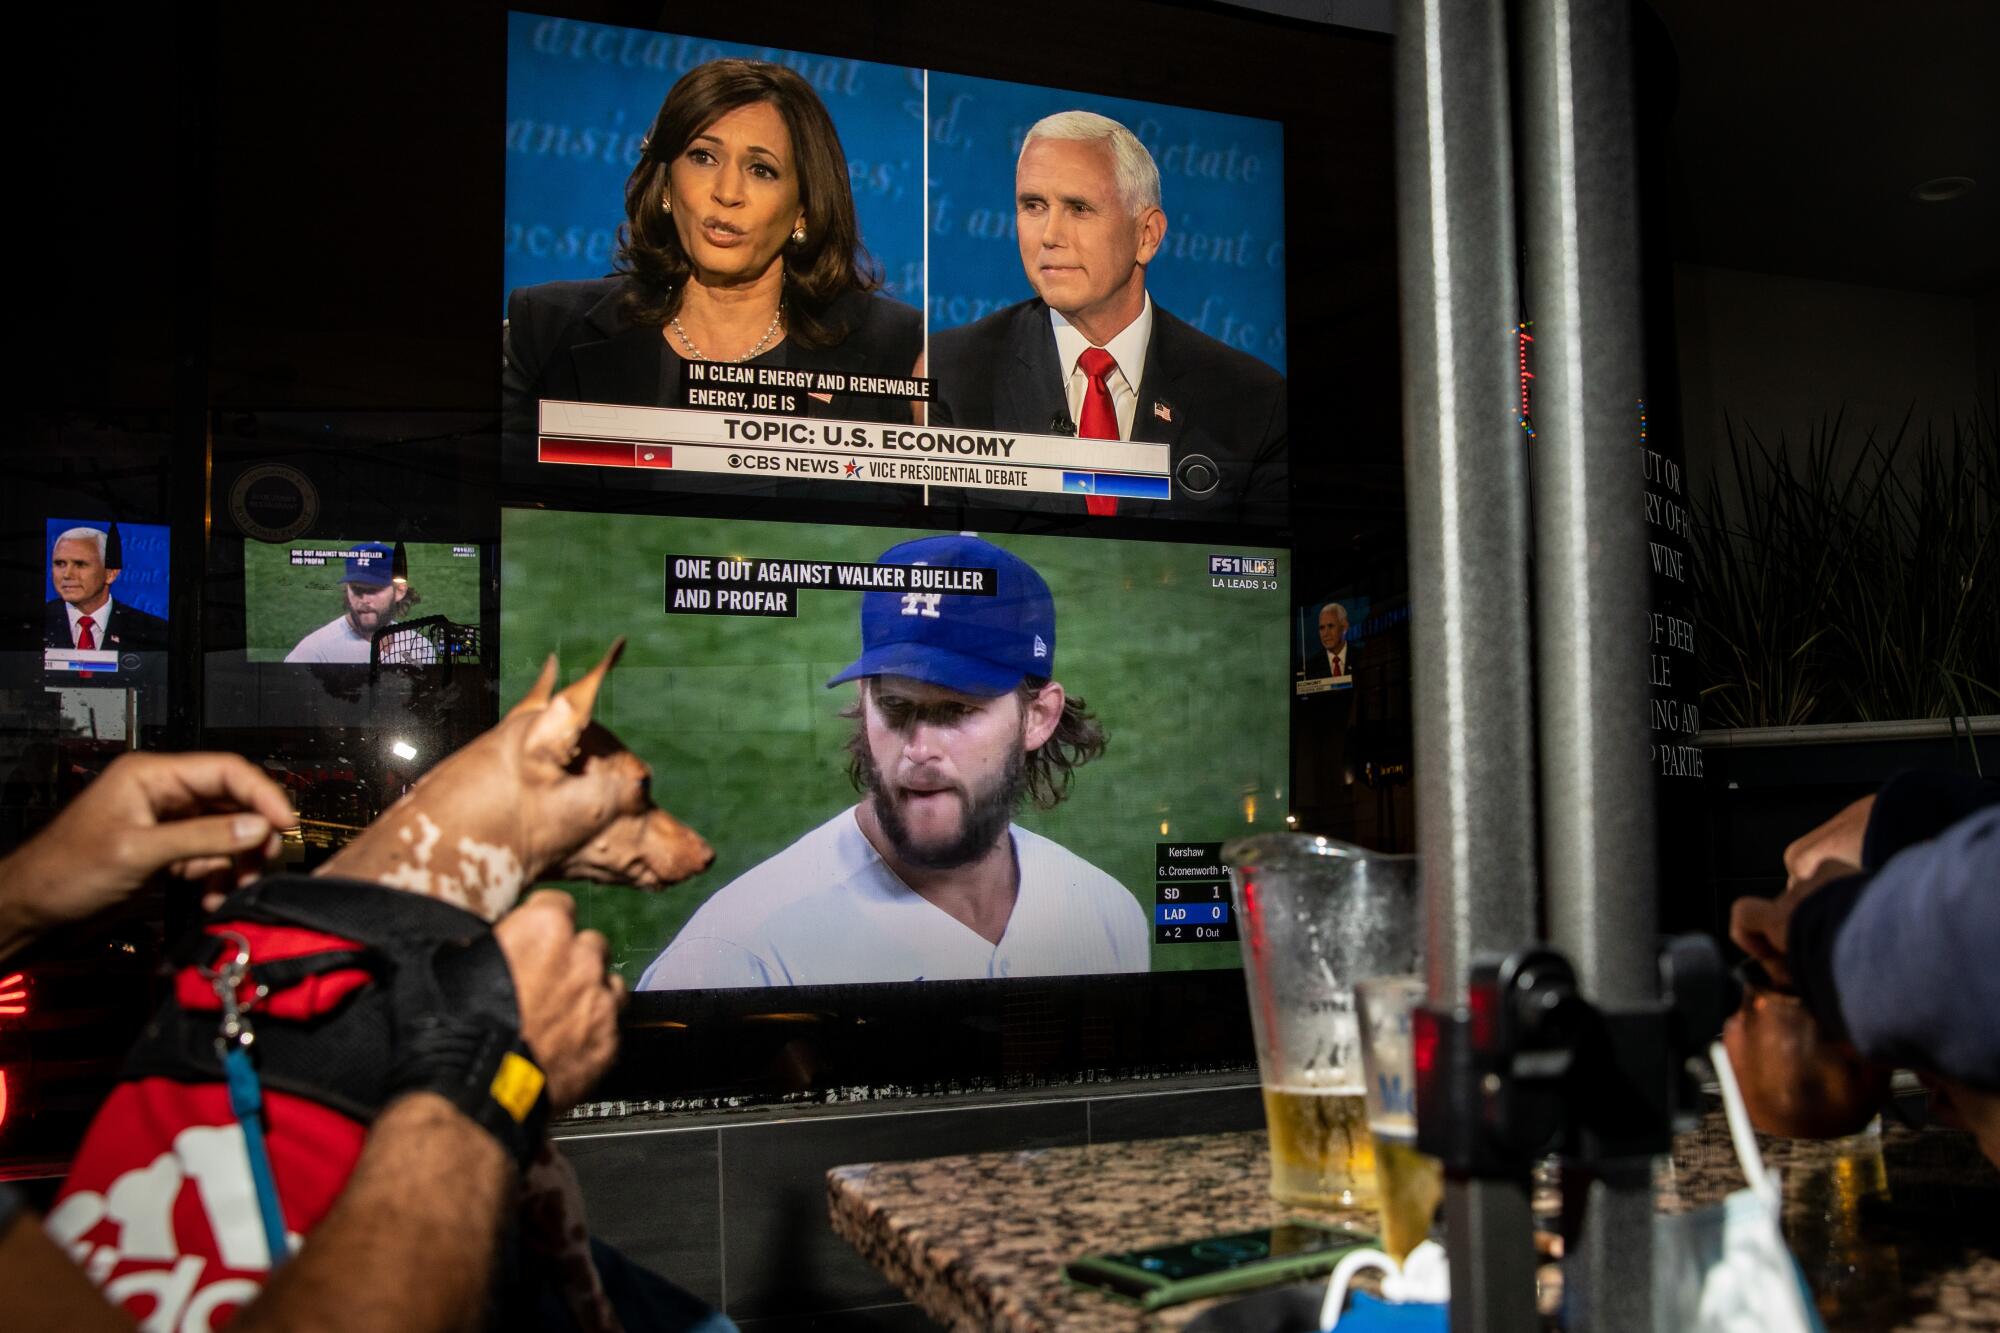 TV screens at a bar show the vice presidential debate and the Dodgers playoff game